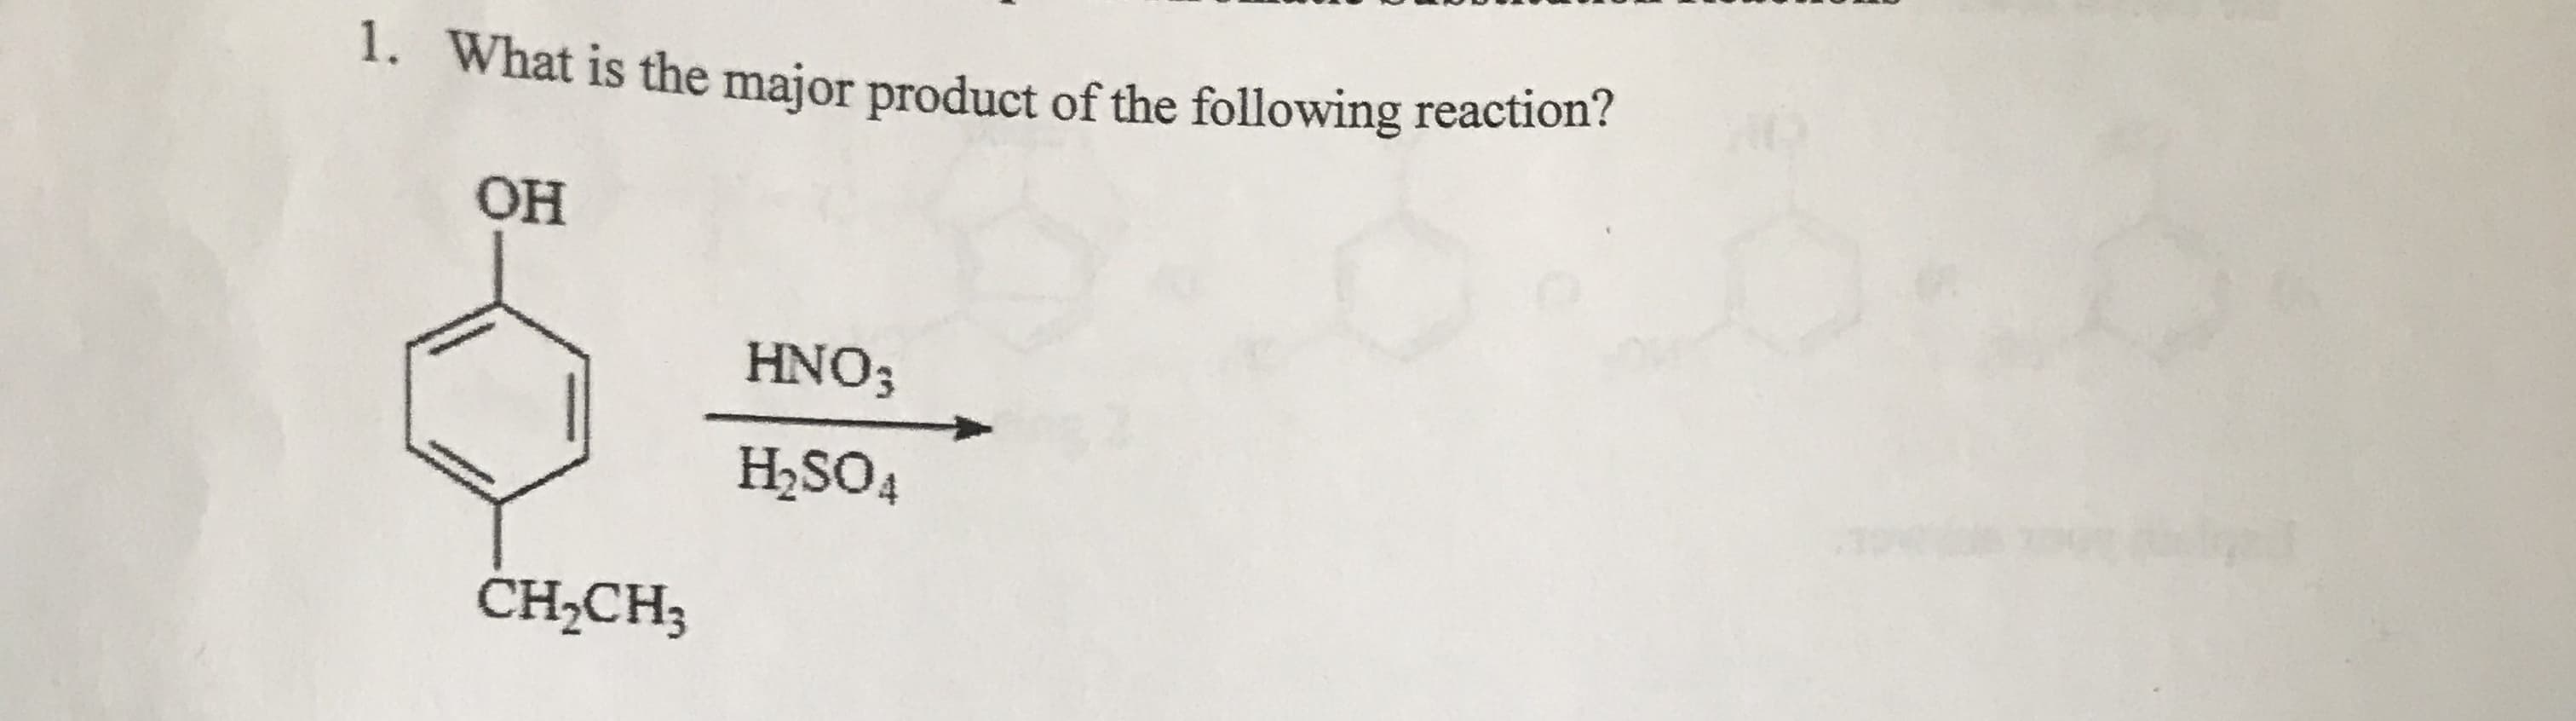 What is the major product of the following reaction?
1.
OH
HNO3
H2SO4
CH2CH3
